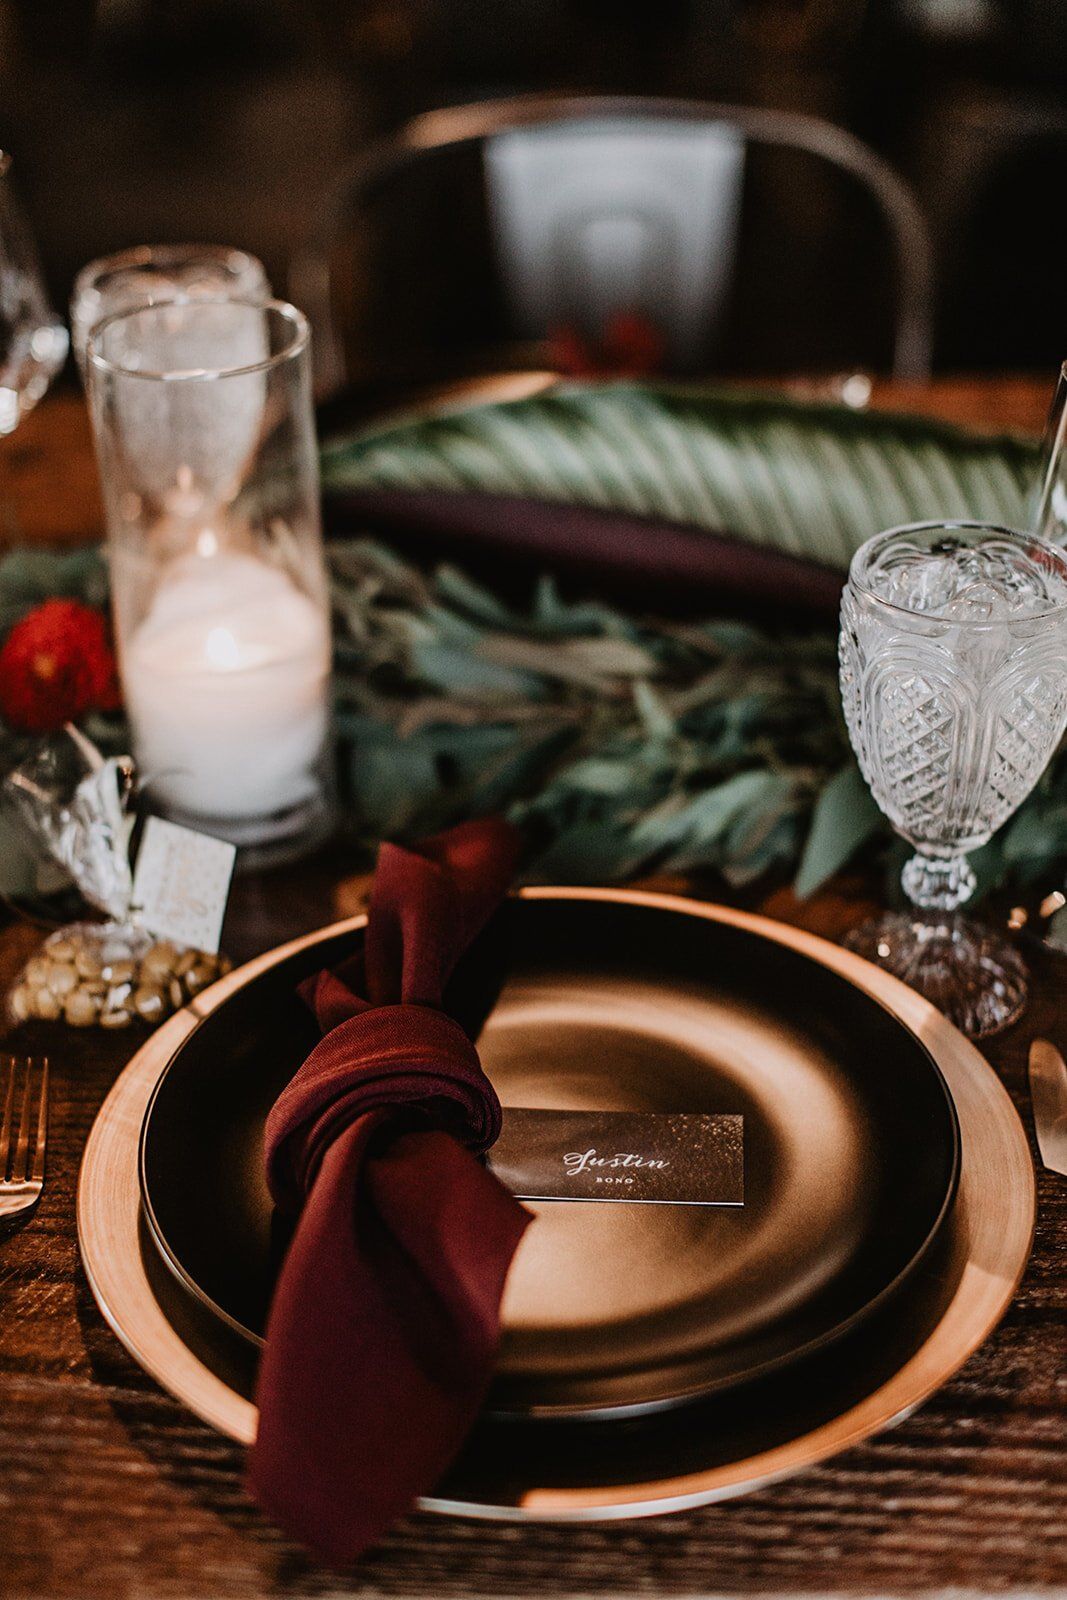 gold and black wedding plates with burgundy napkin for fall wedding